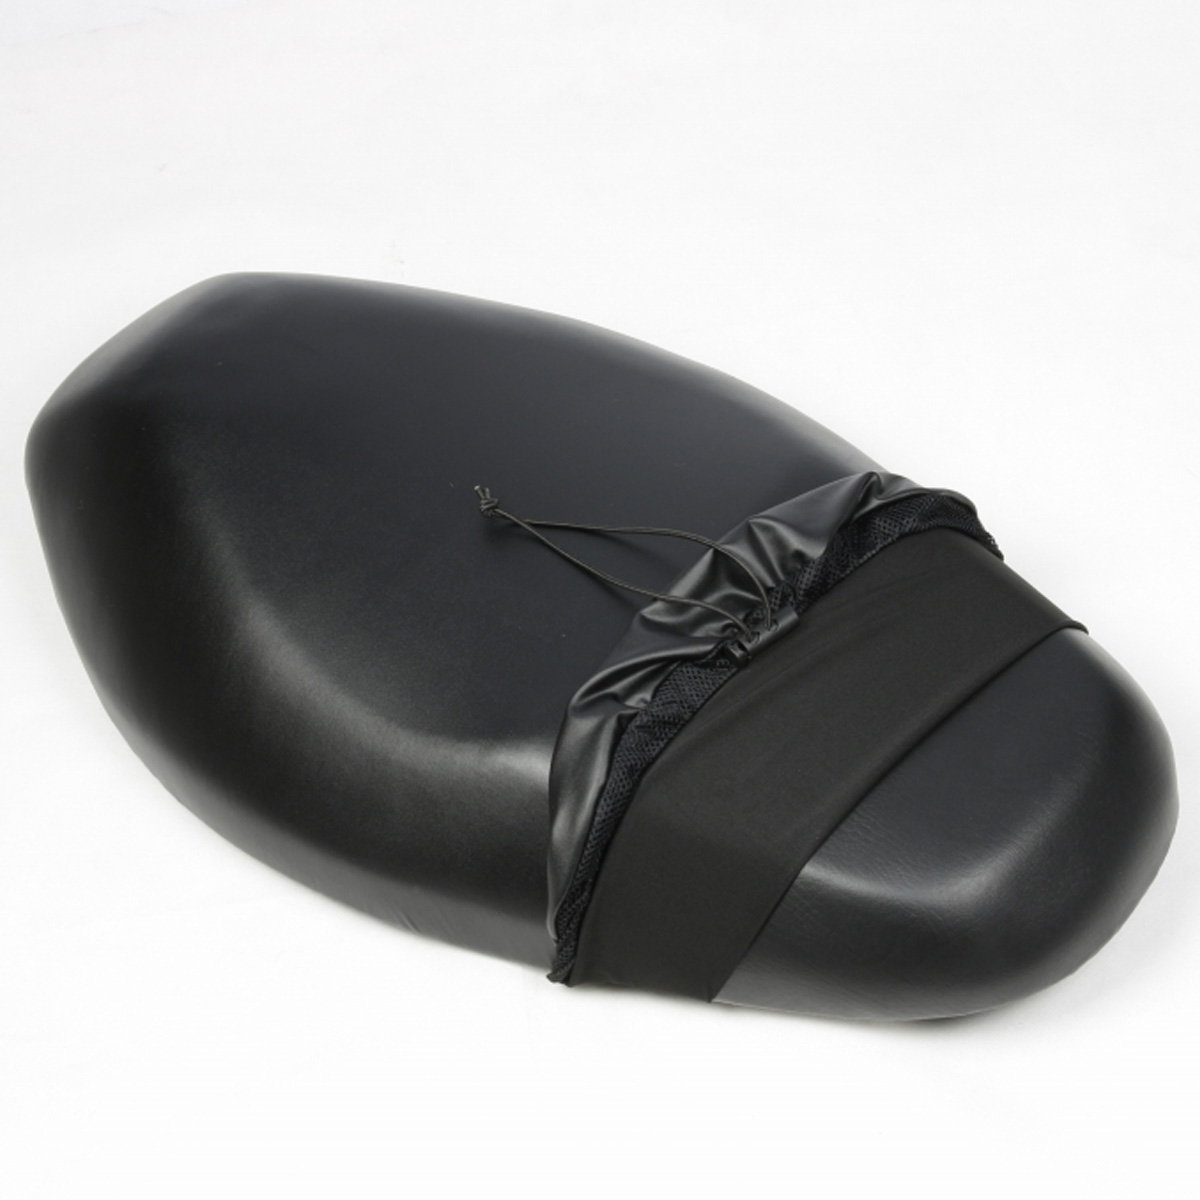 Waterproof Motorcycle Seat Cover Non-Slip Scooter Heat Insulation Cushion Protector Universal